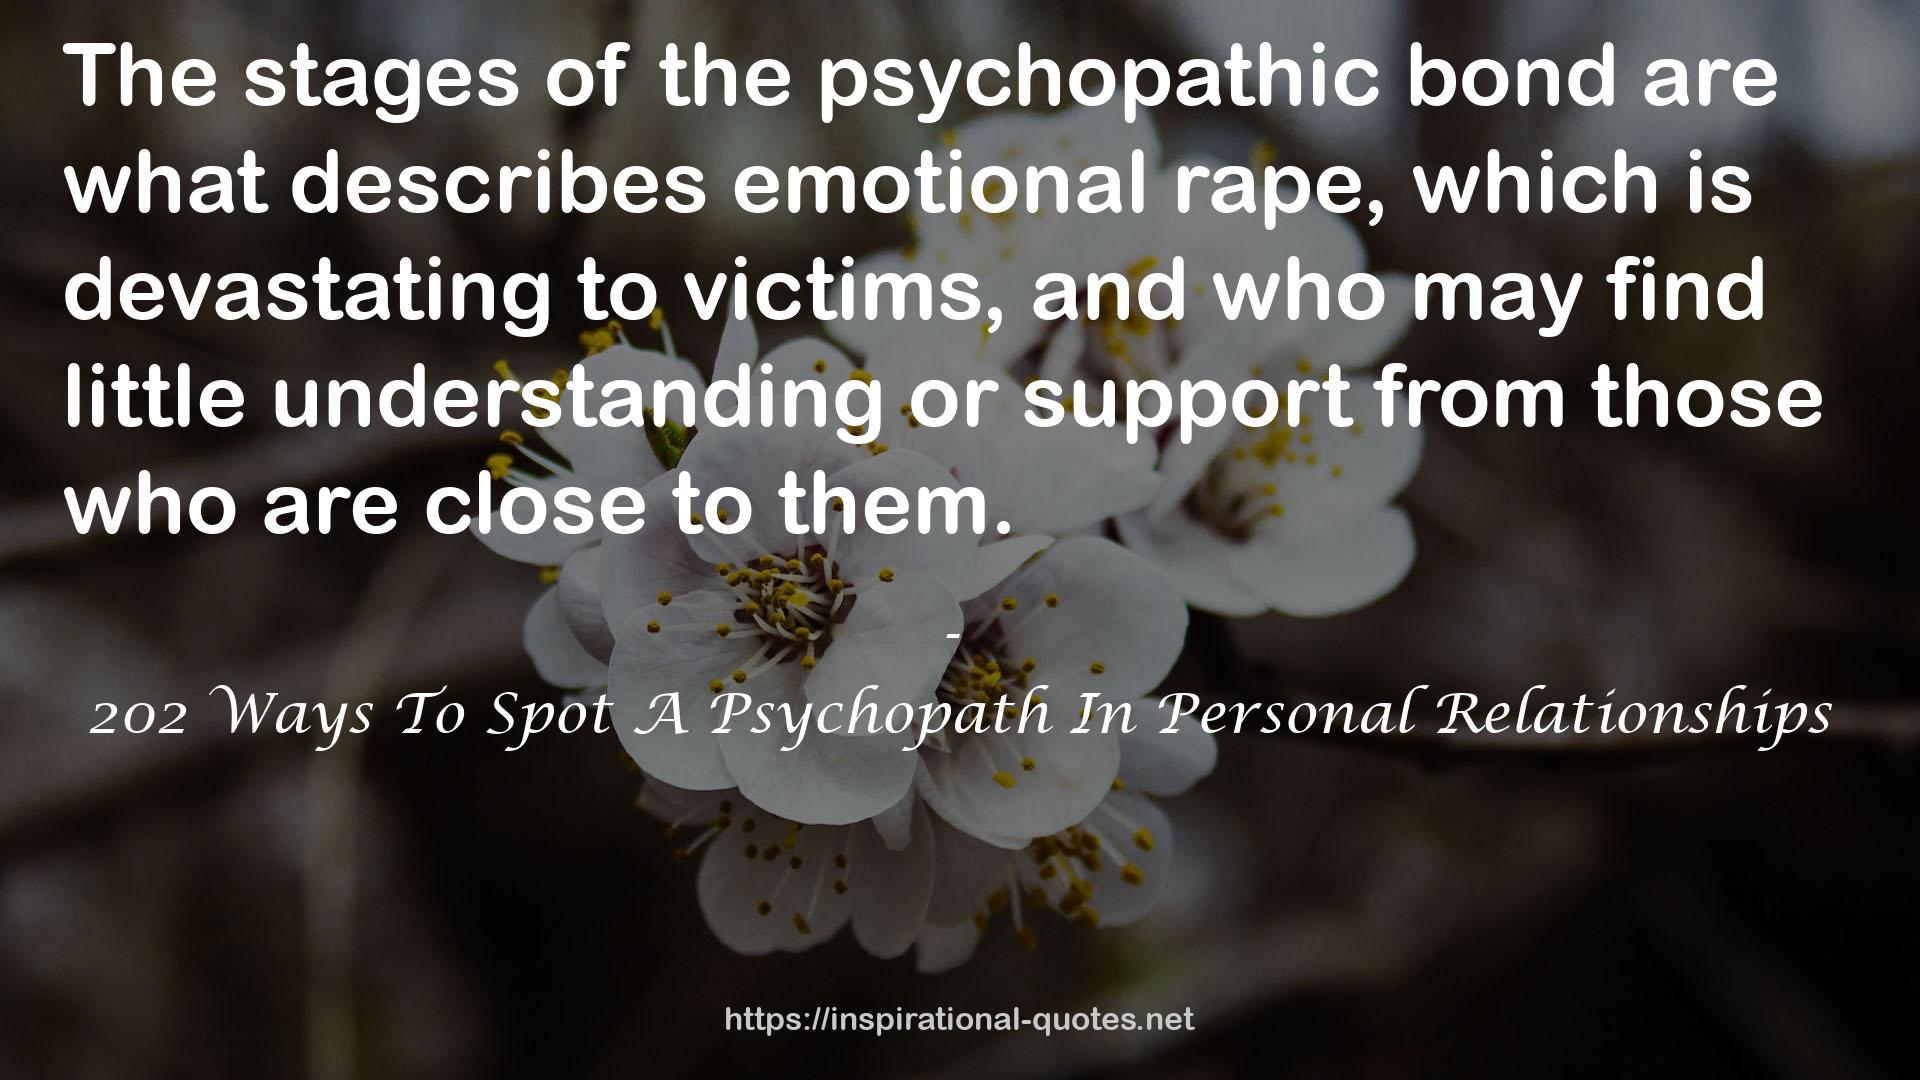 202 Ways To Spot A Psychopath In Personal Relationships QUOTES